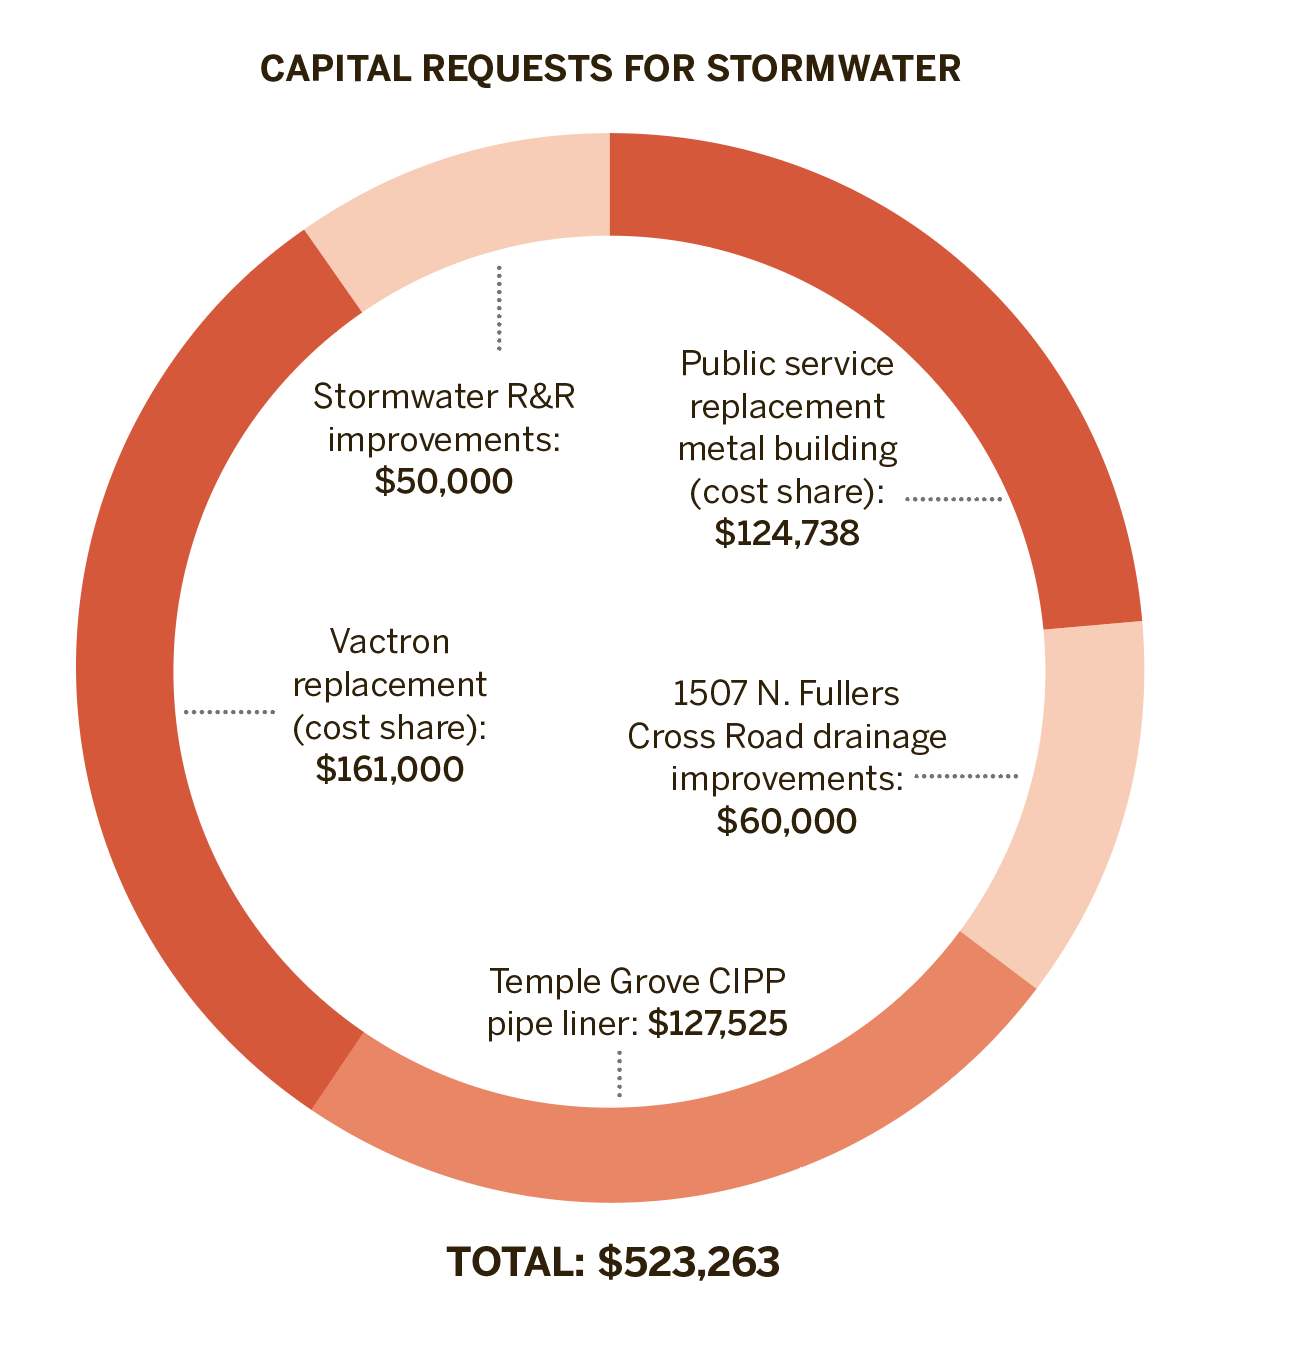 Fiscal Year 2020-21's capital requests for Winter Garden stormwater projects.